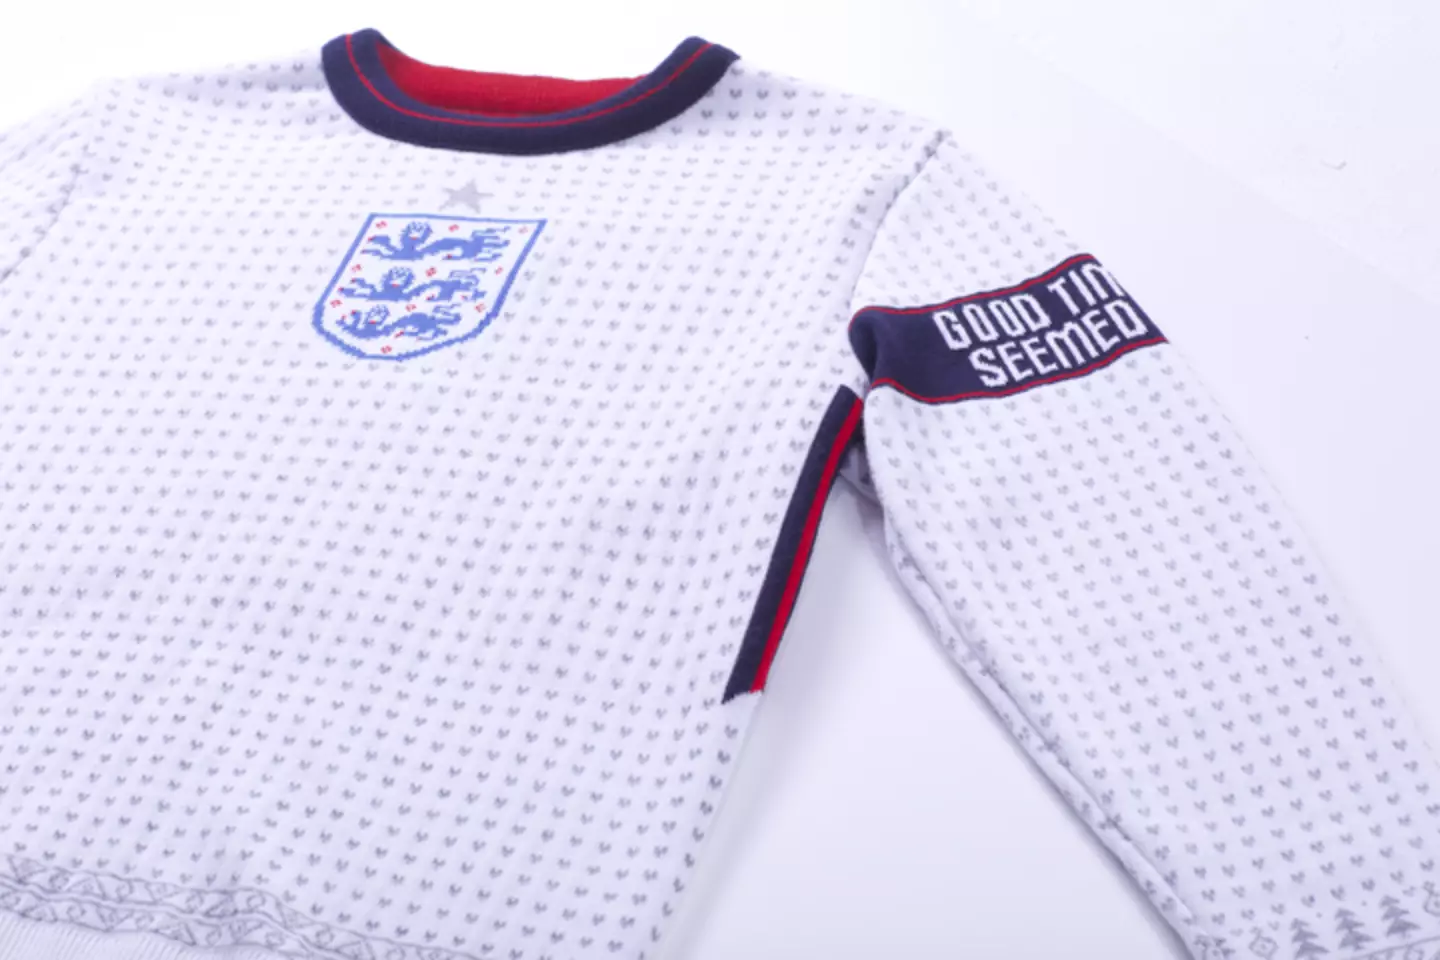 The ultimate jumper for England fans this Christmas. Image: notjust clothing